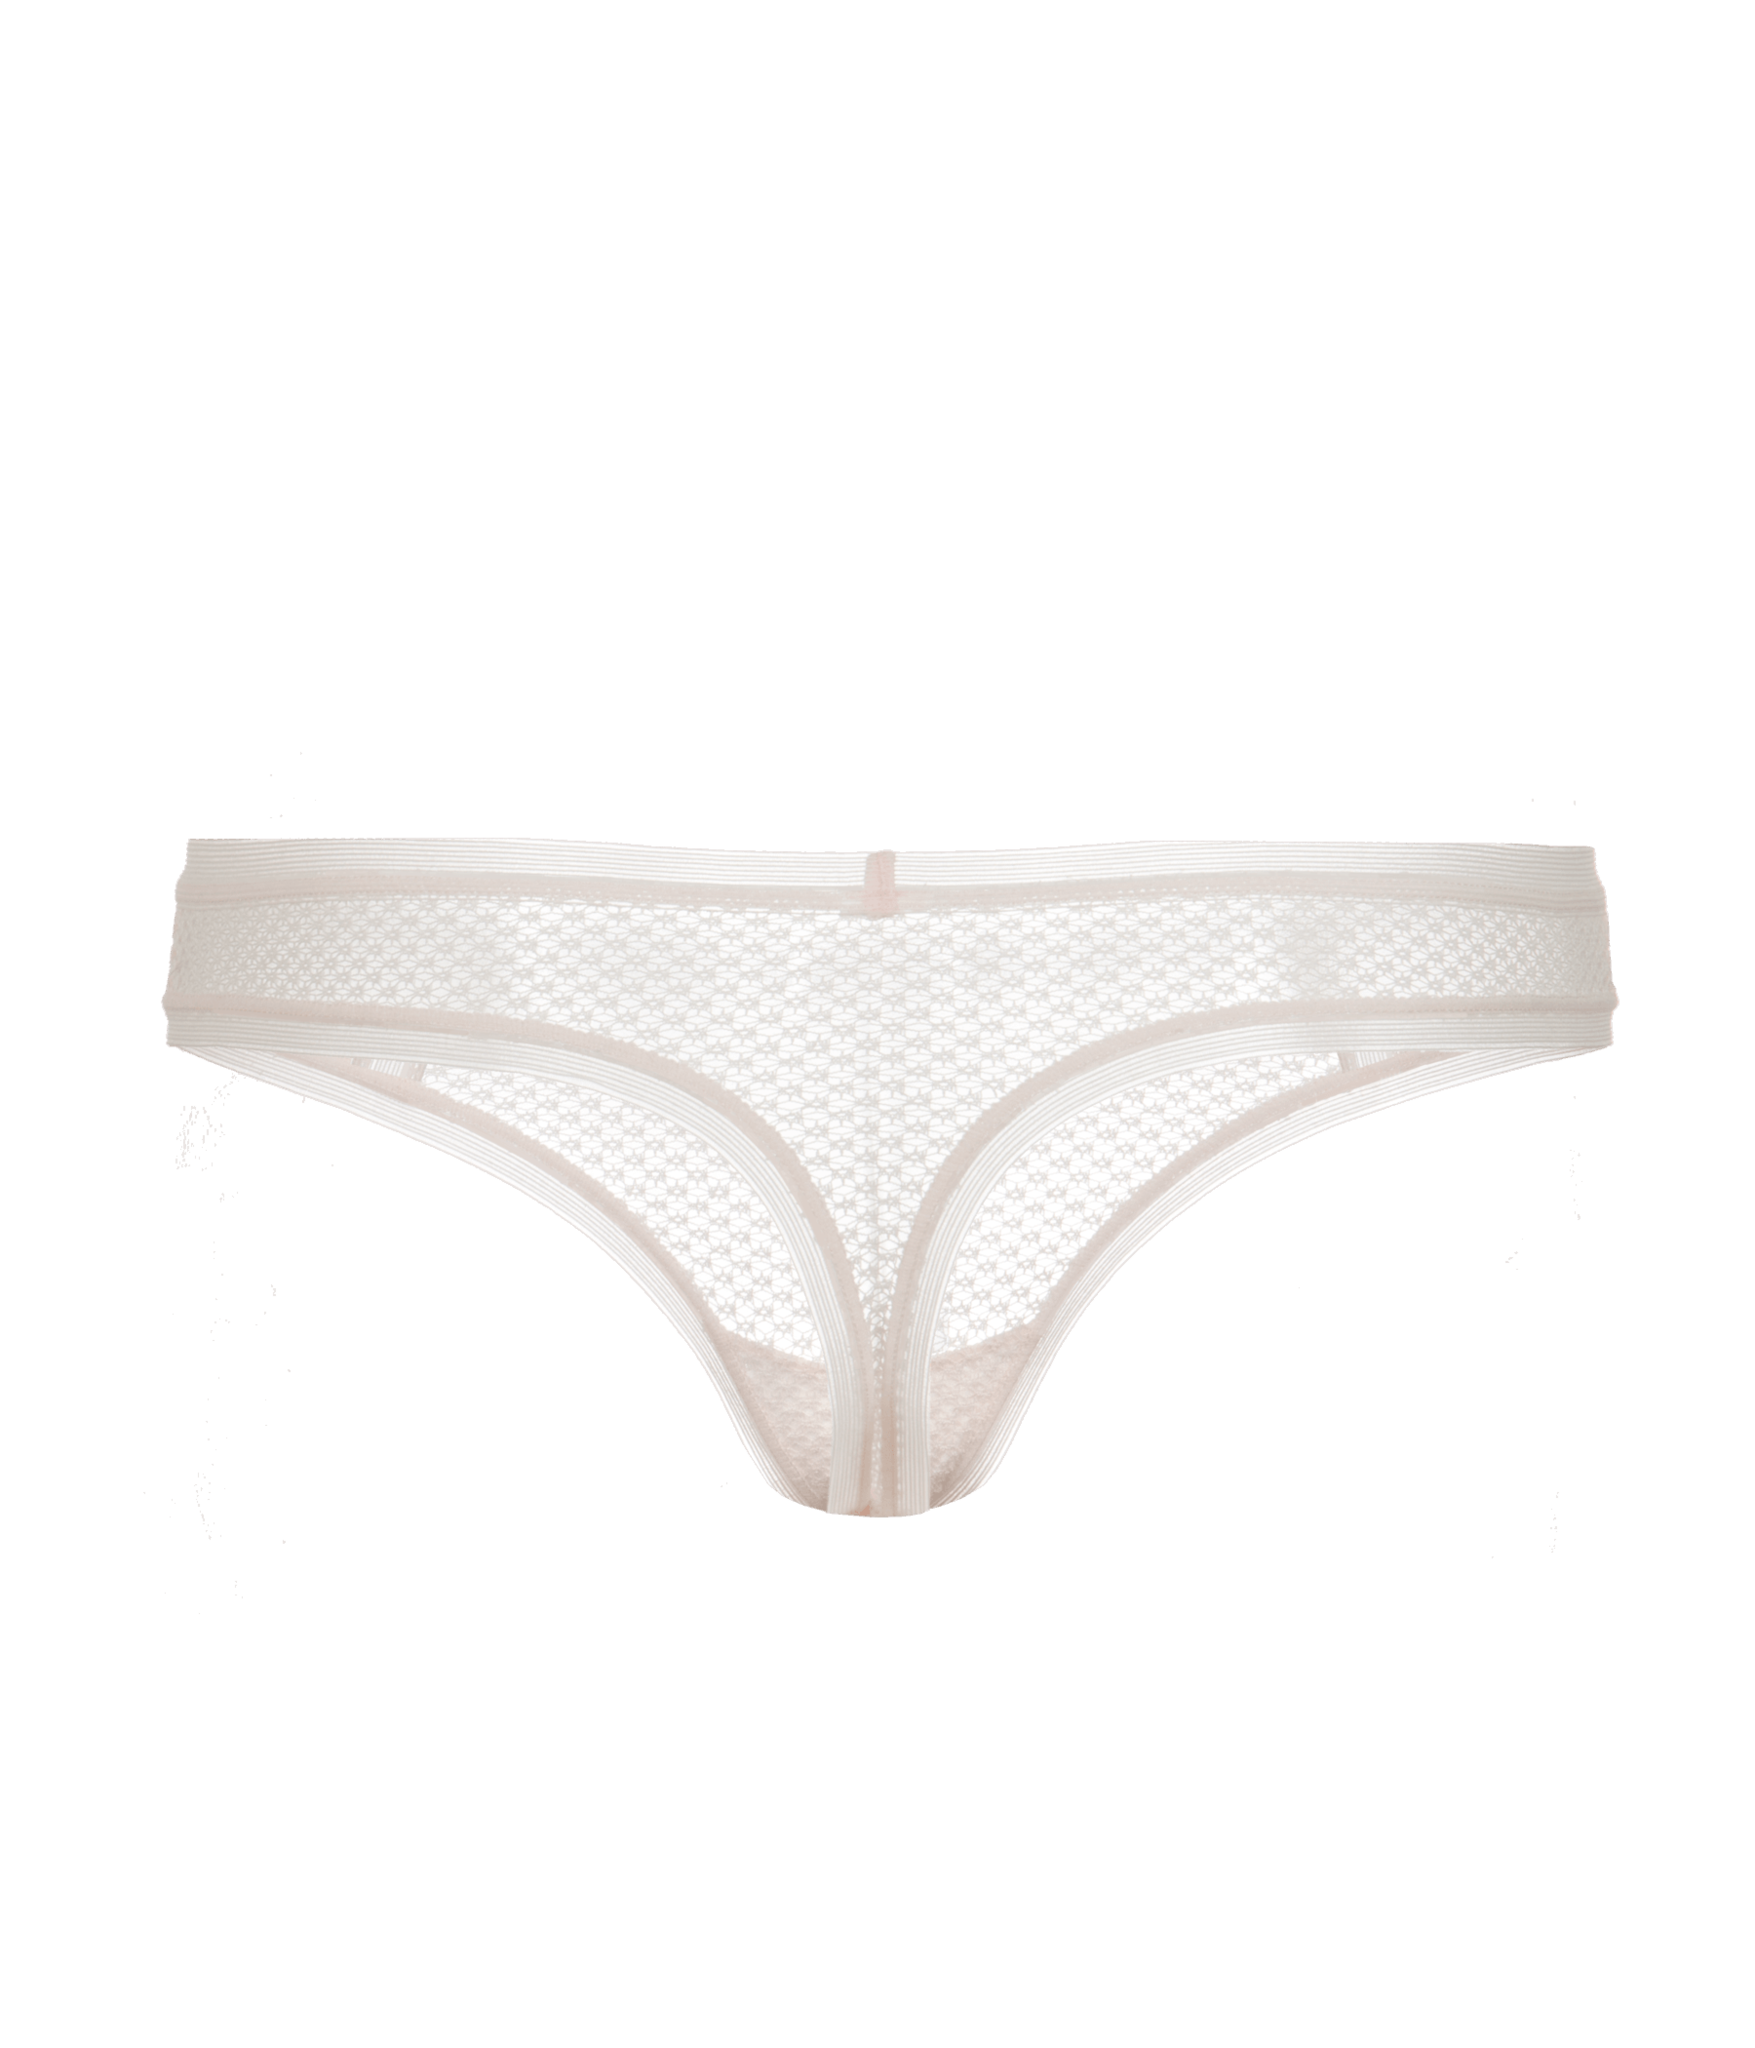 Thong drawing at getdrawings. Underwear clipart lace underwear